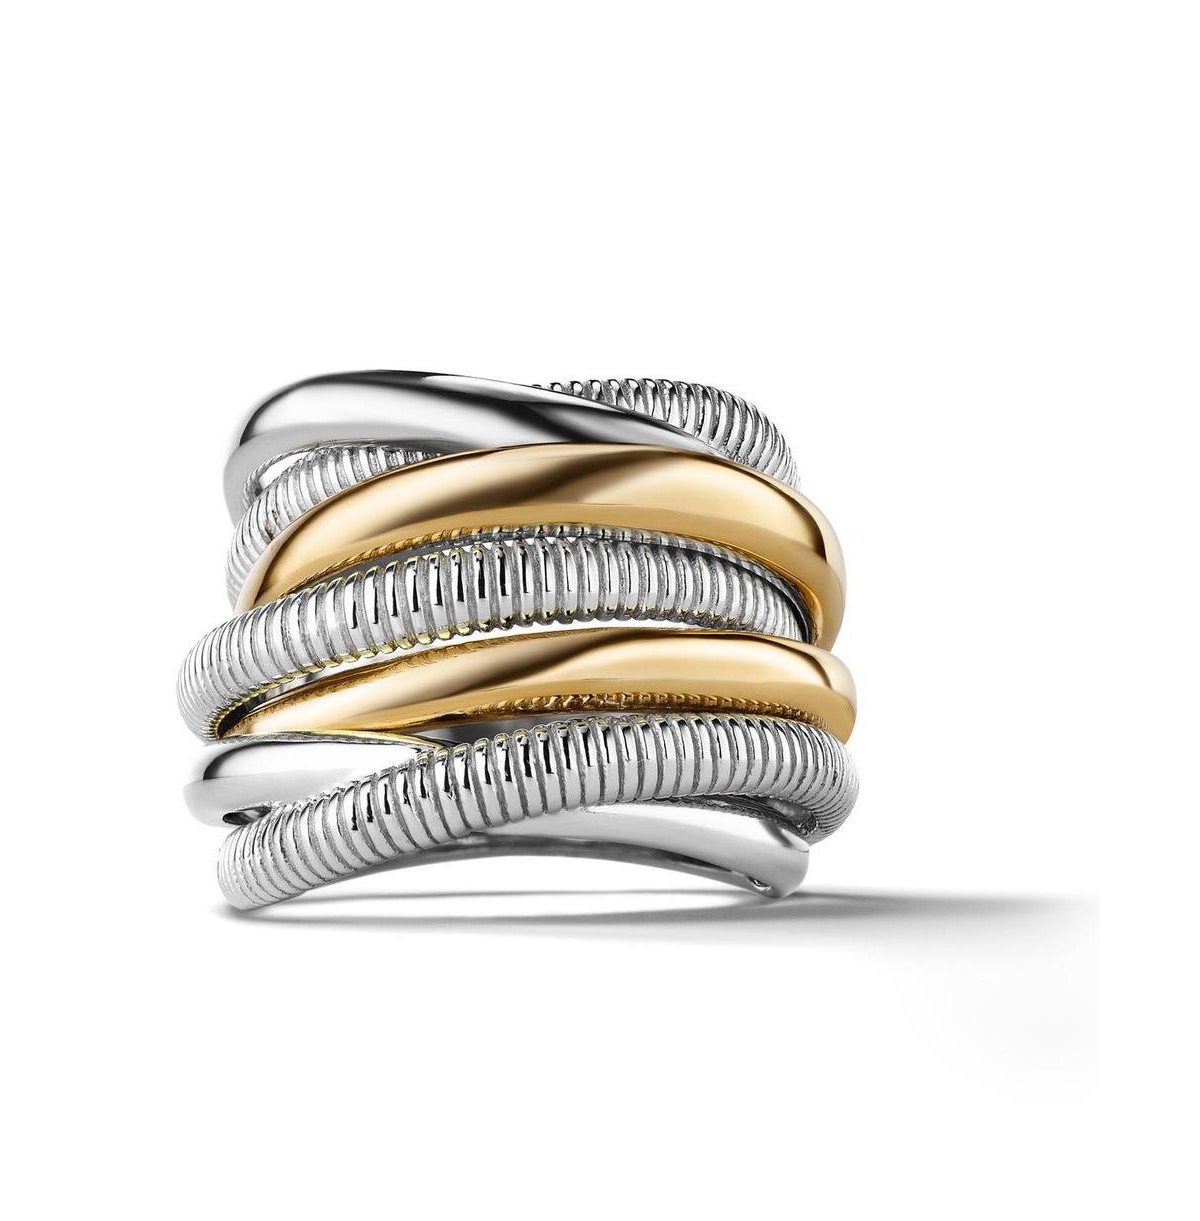 Eternity Seven Band Highway Ring with 18K Gold - Silver/gold